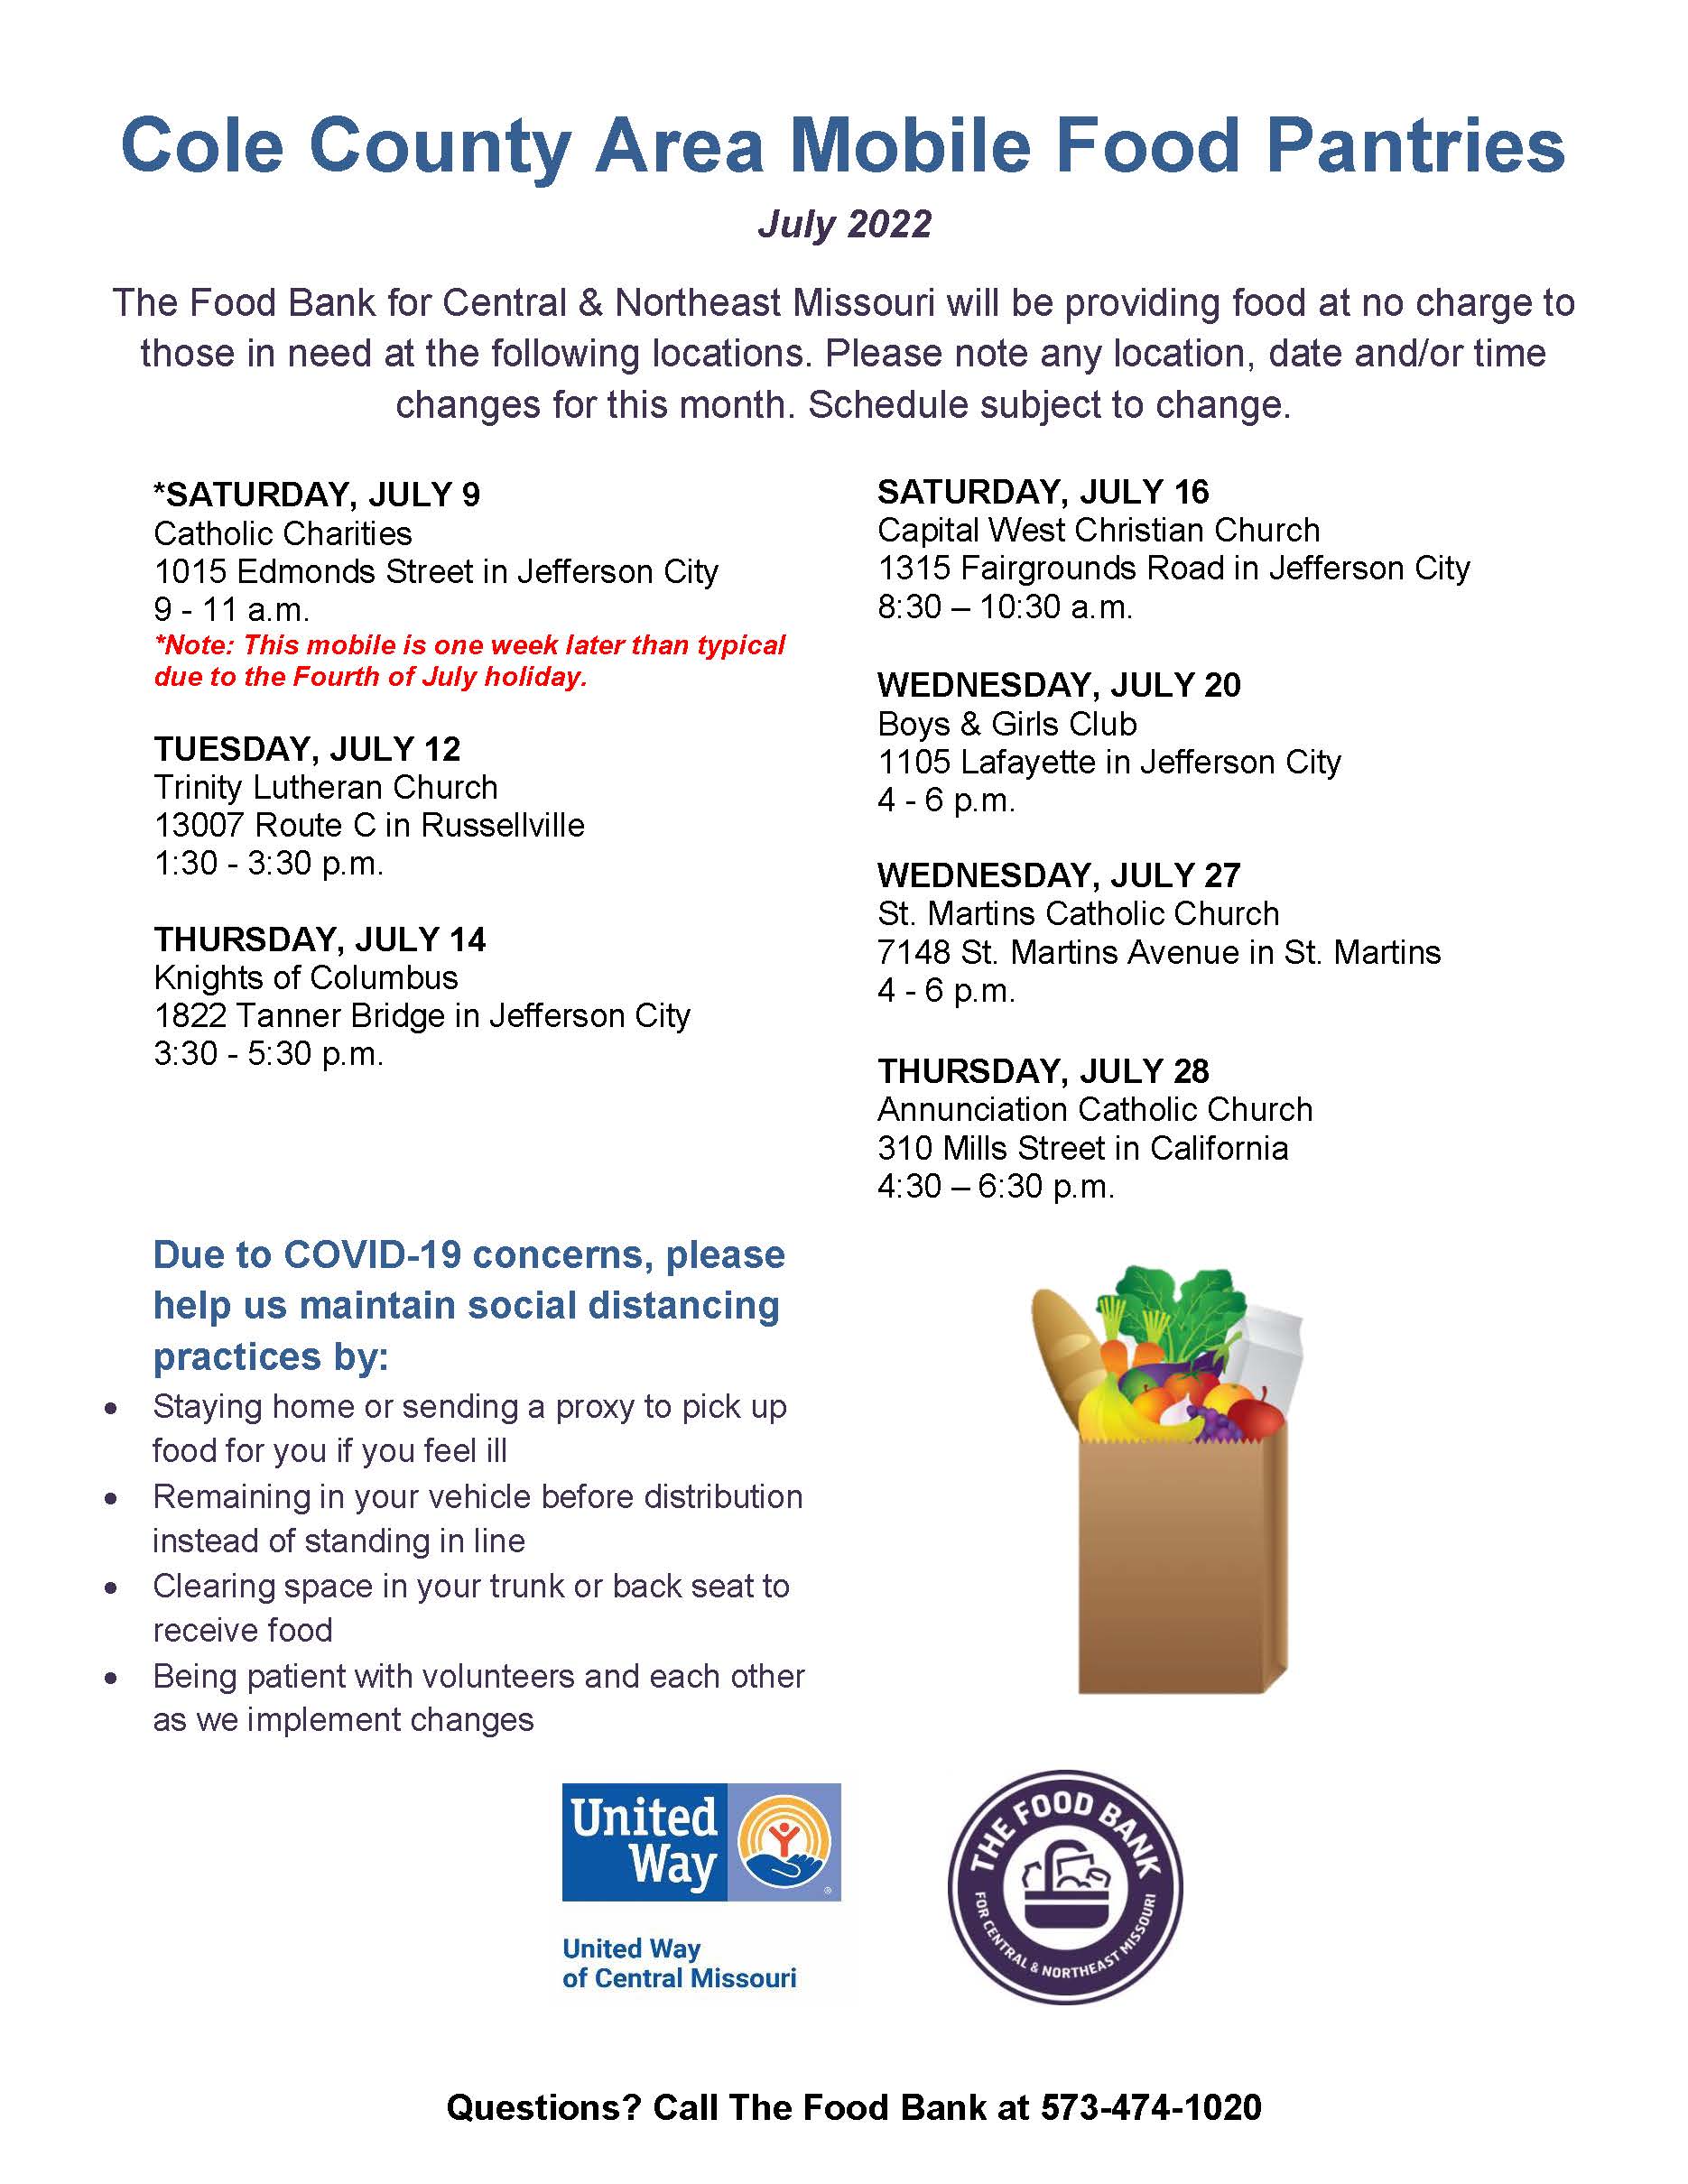 Mobile Food Pantry @ Catholic Charities July 9 from 9 - 11 am